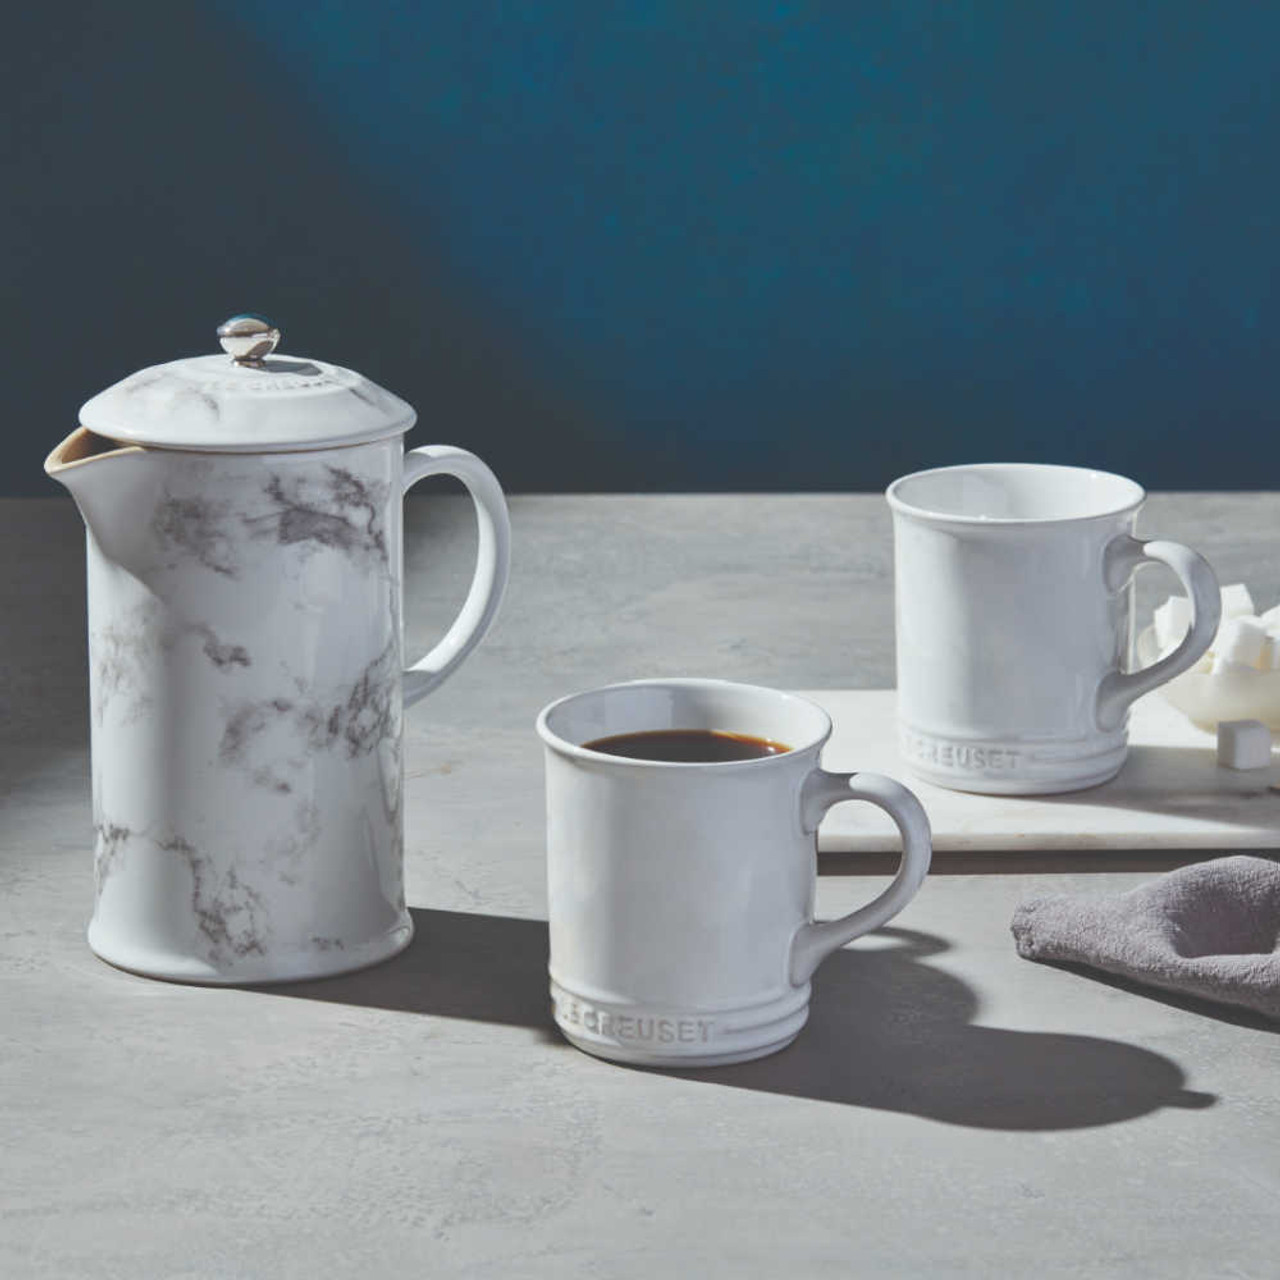 https://cdn11.bigcommerce.com/s-hccytny0od/images/stencil/1280x1280/products/5496/23911/Le_Creuset_Marble_Collection_French_Press_1__61846.1685131482.jpg?c=2?imbypass=on